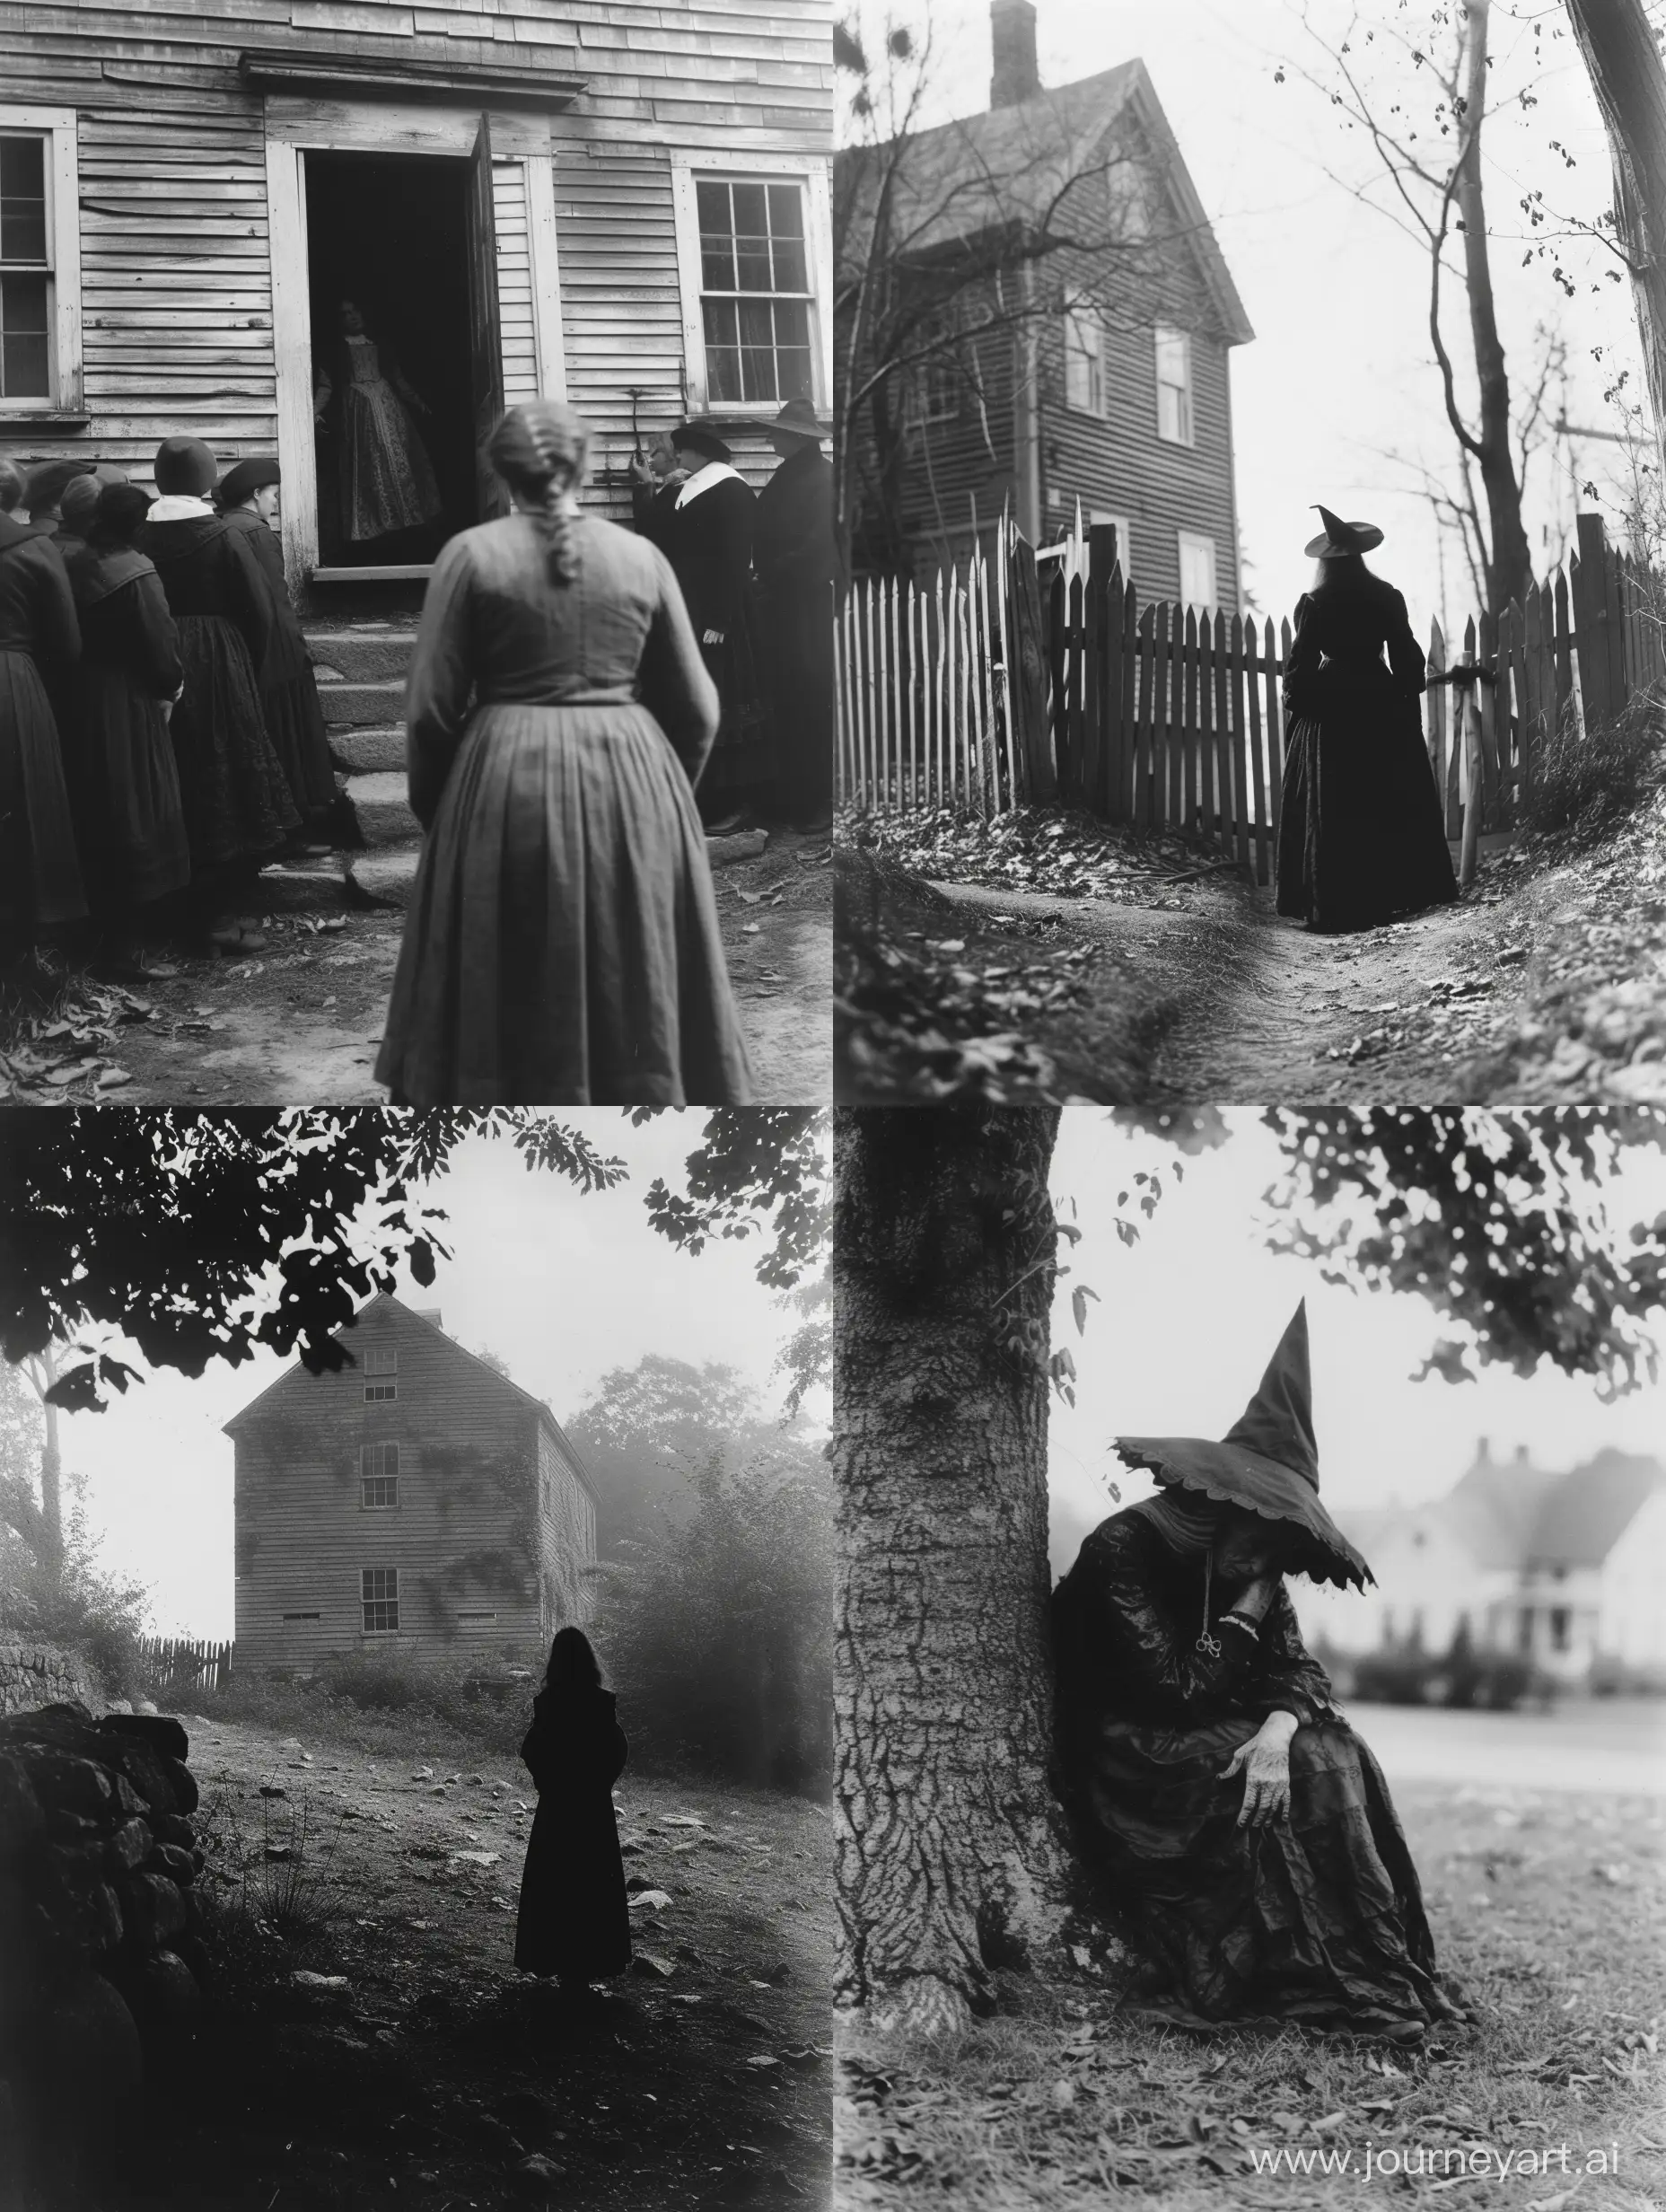 Untold stories of the Salem_witch_trials, grayscale, photo taken on provia